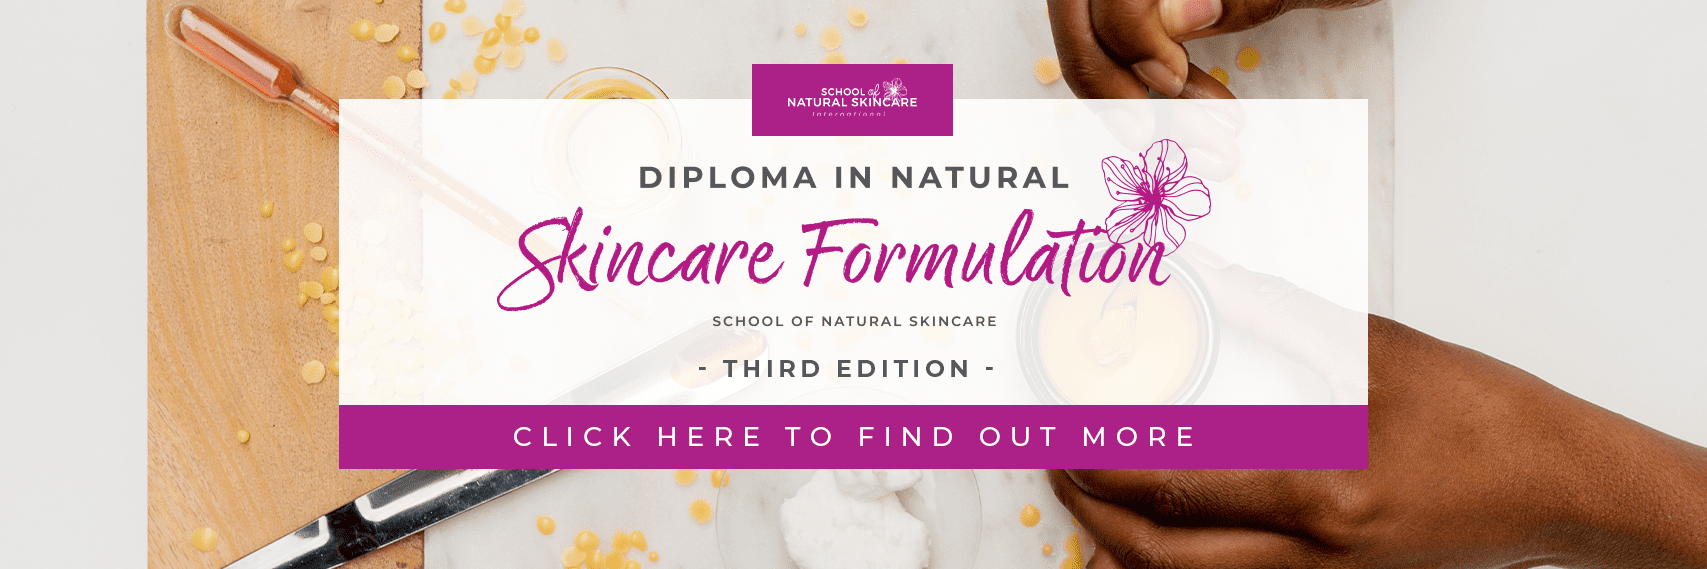 Skin care formulation: how to make your own fabulous skin care products from scratch Skincare Formulation 